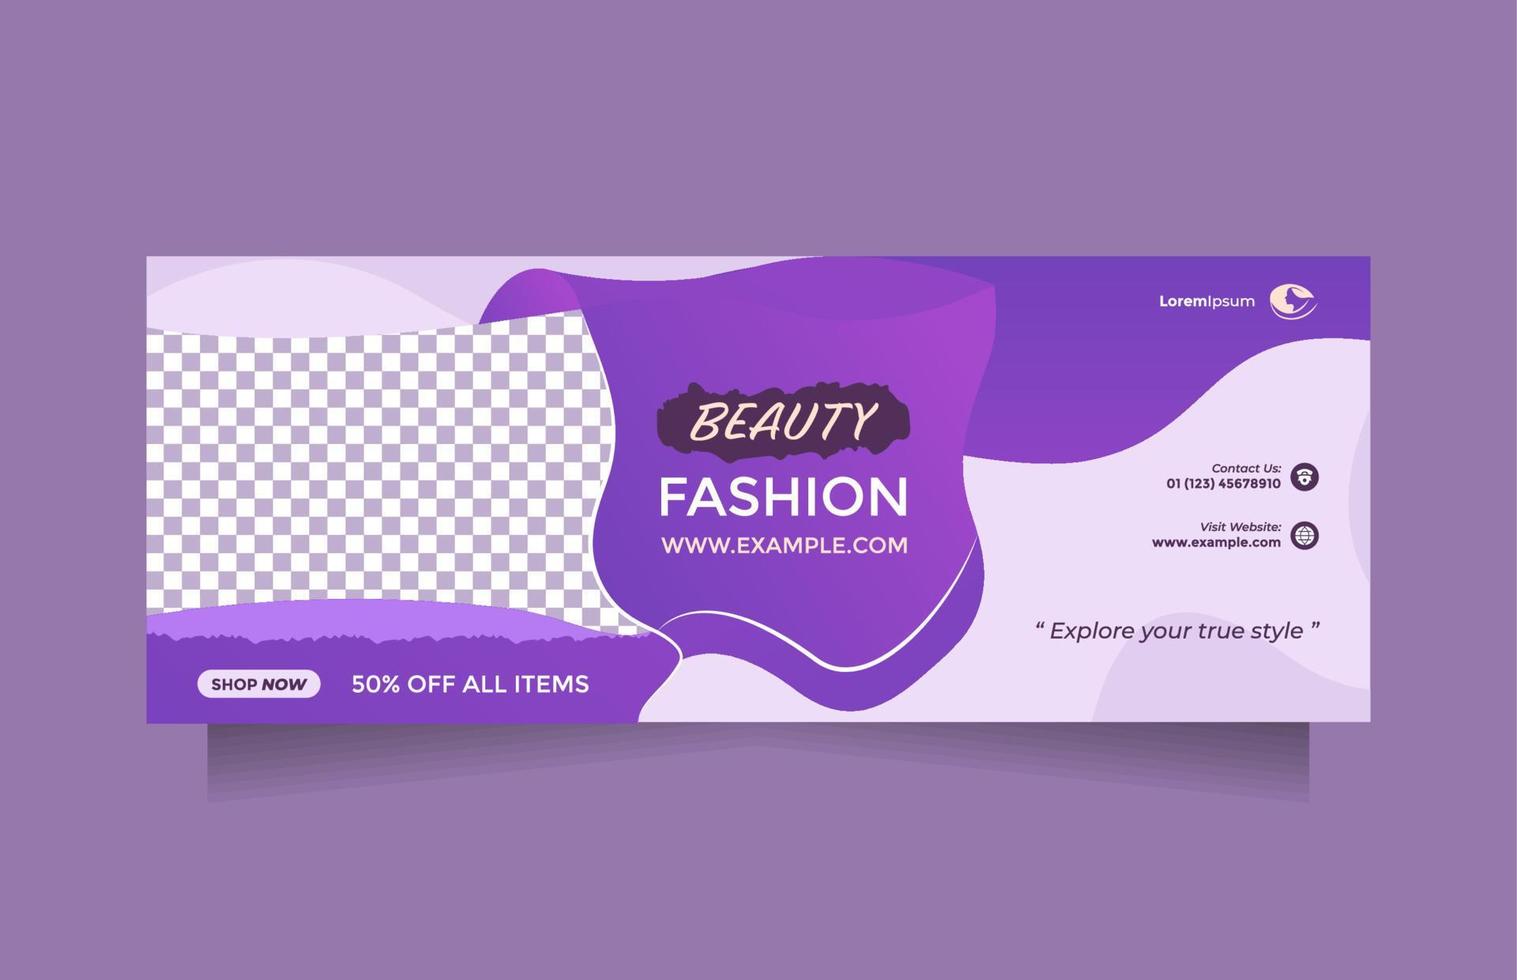 Horizontal social media and web banner template with clean purple. Minimalist beauty fashion sale promotion can be used for promotion of beauty products, clothes, cosmetic, modeling, hair care, etc vector